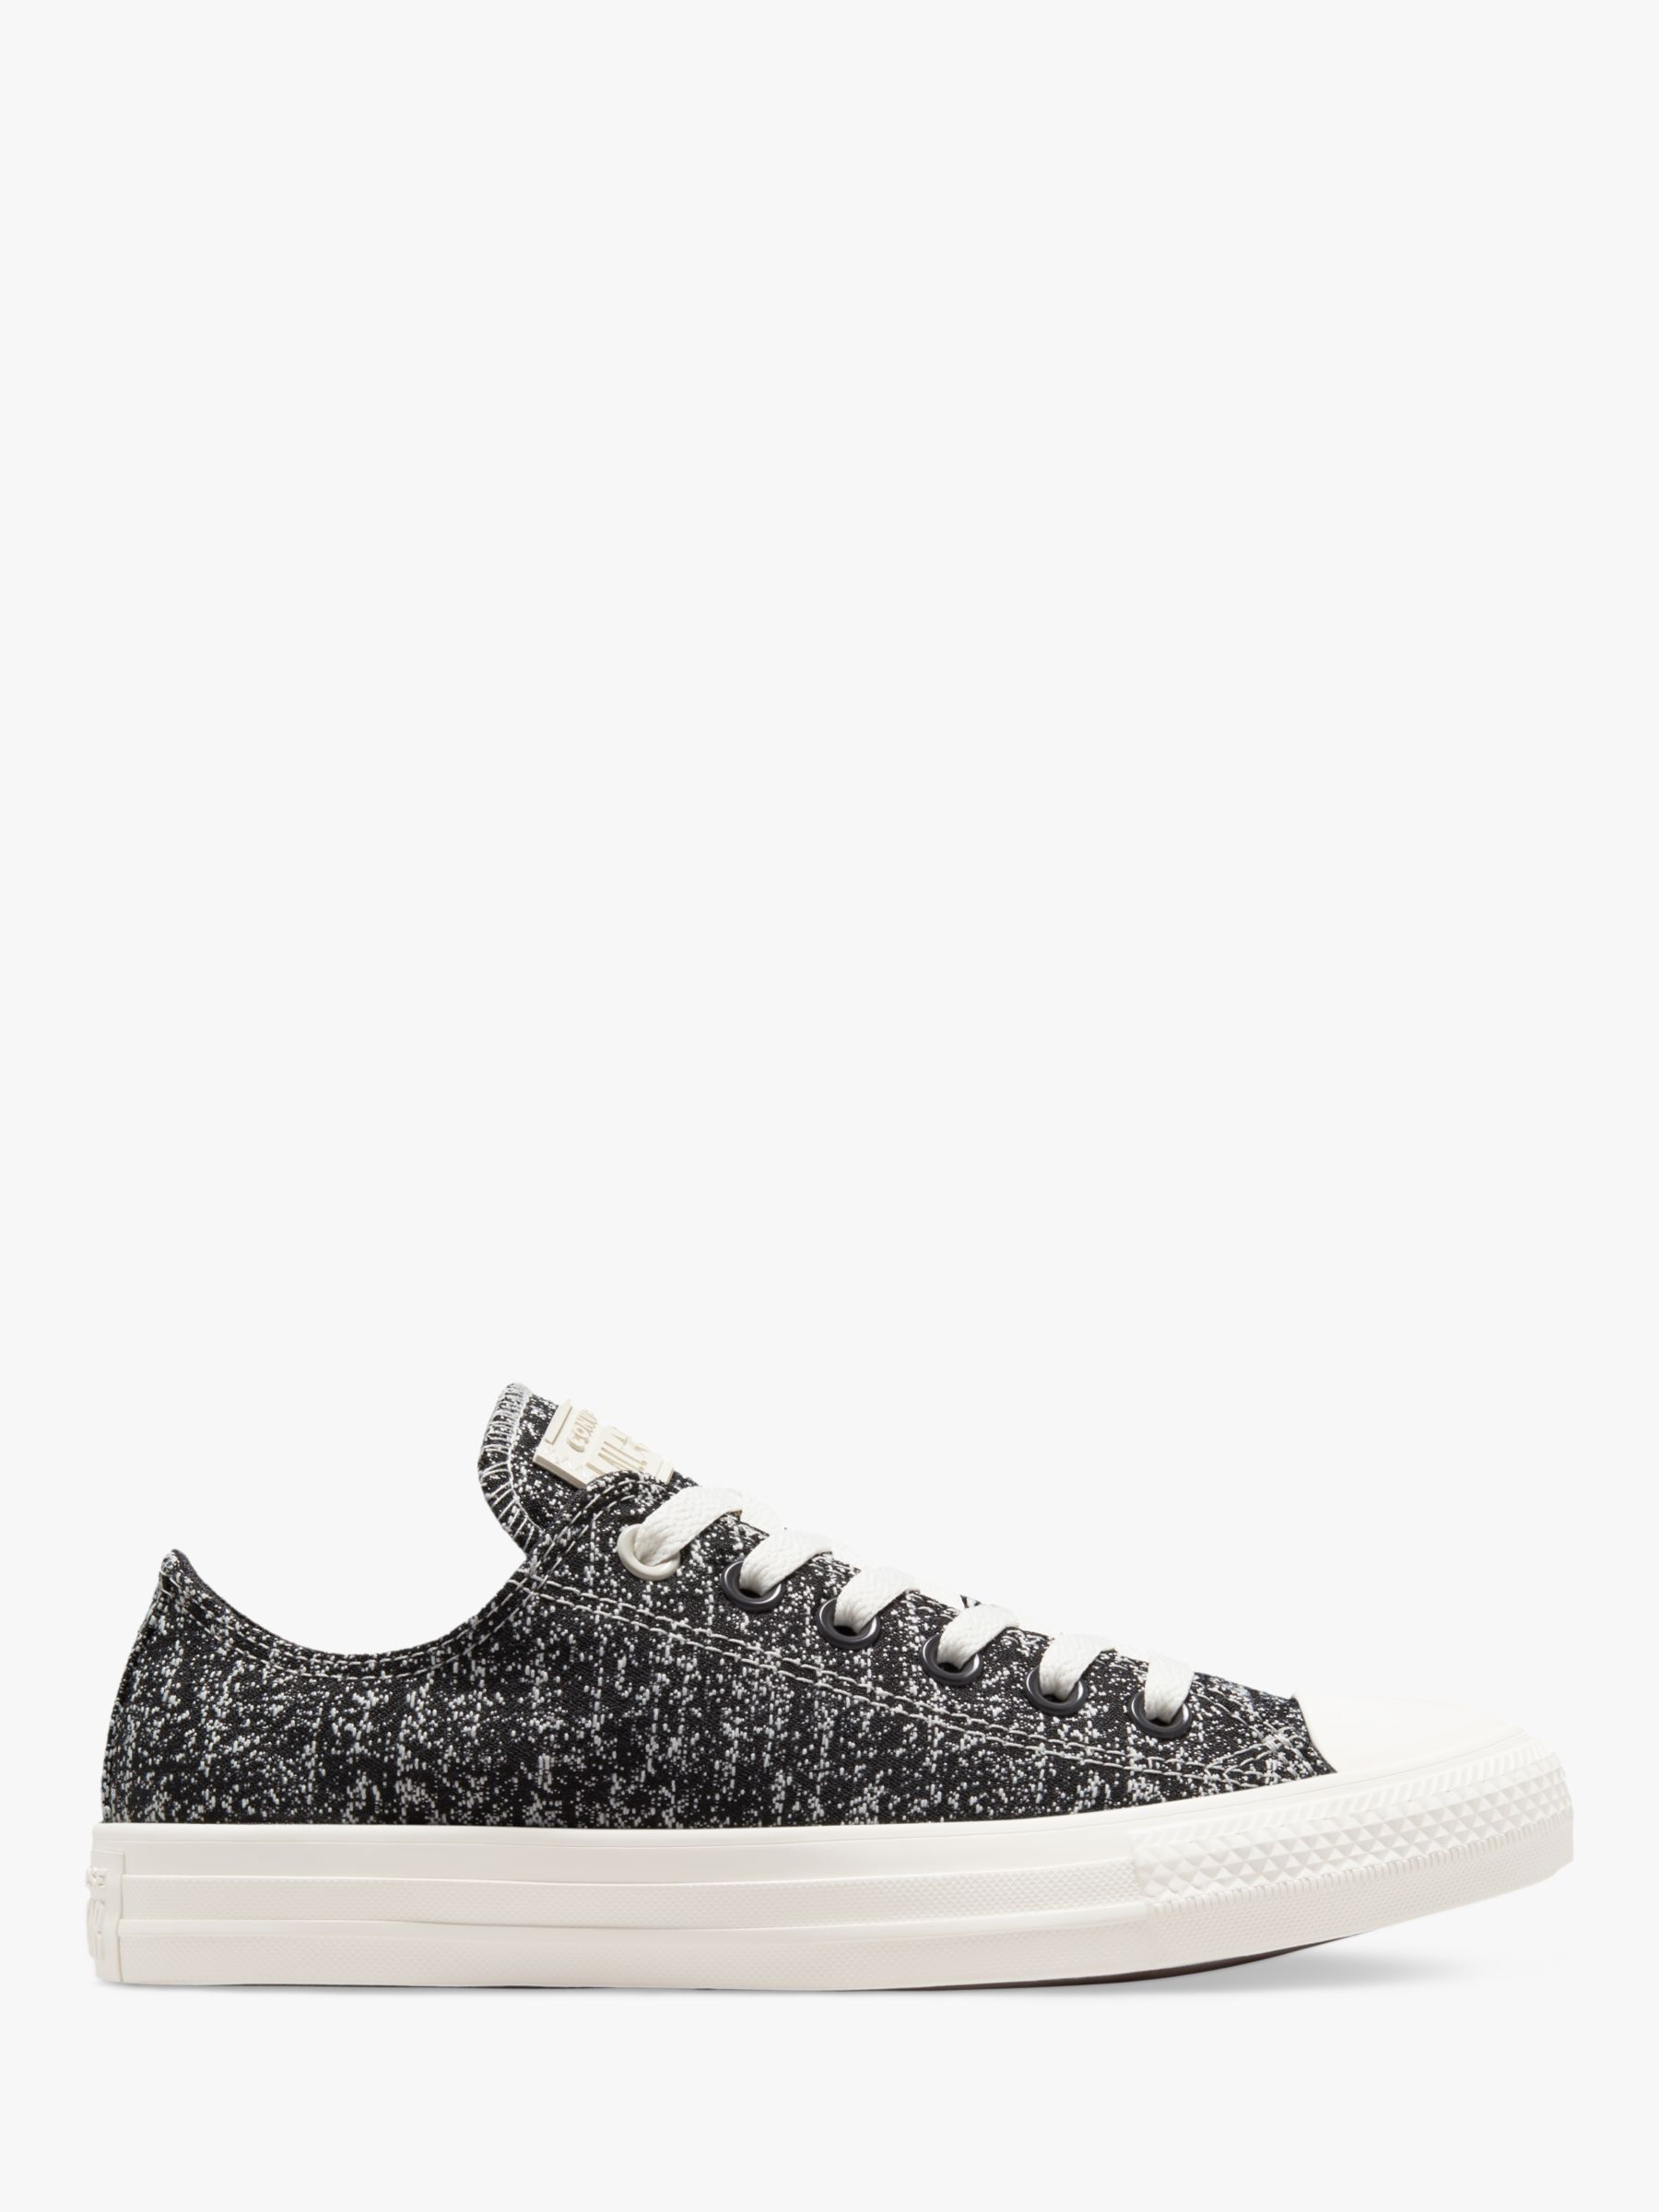 Converse All Star Storm Wind Low Top Textile Trainers